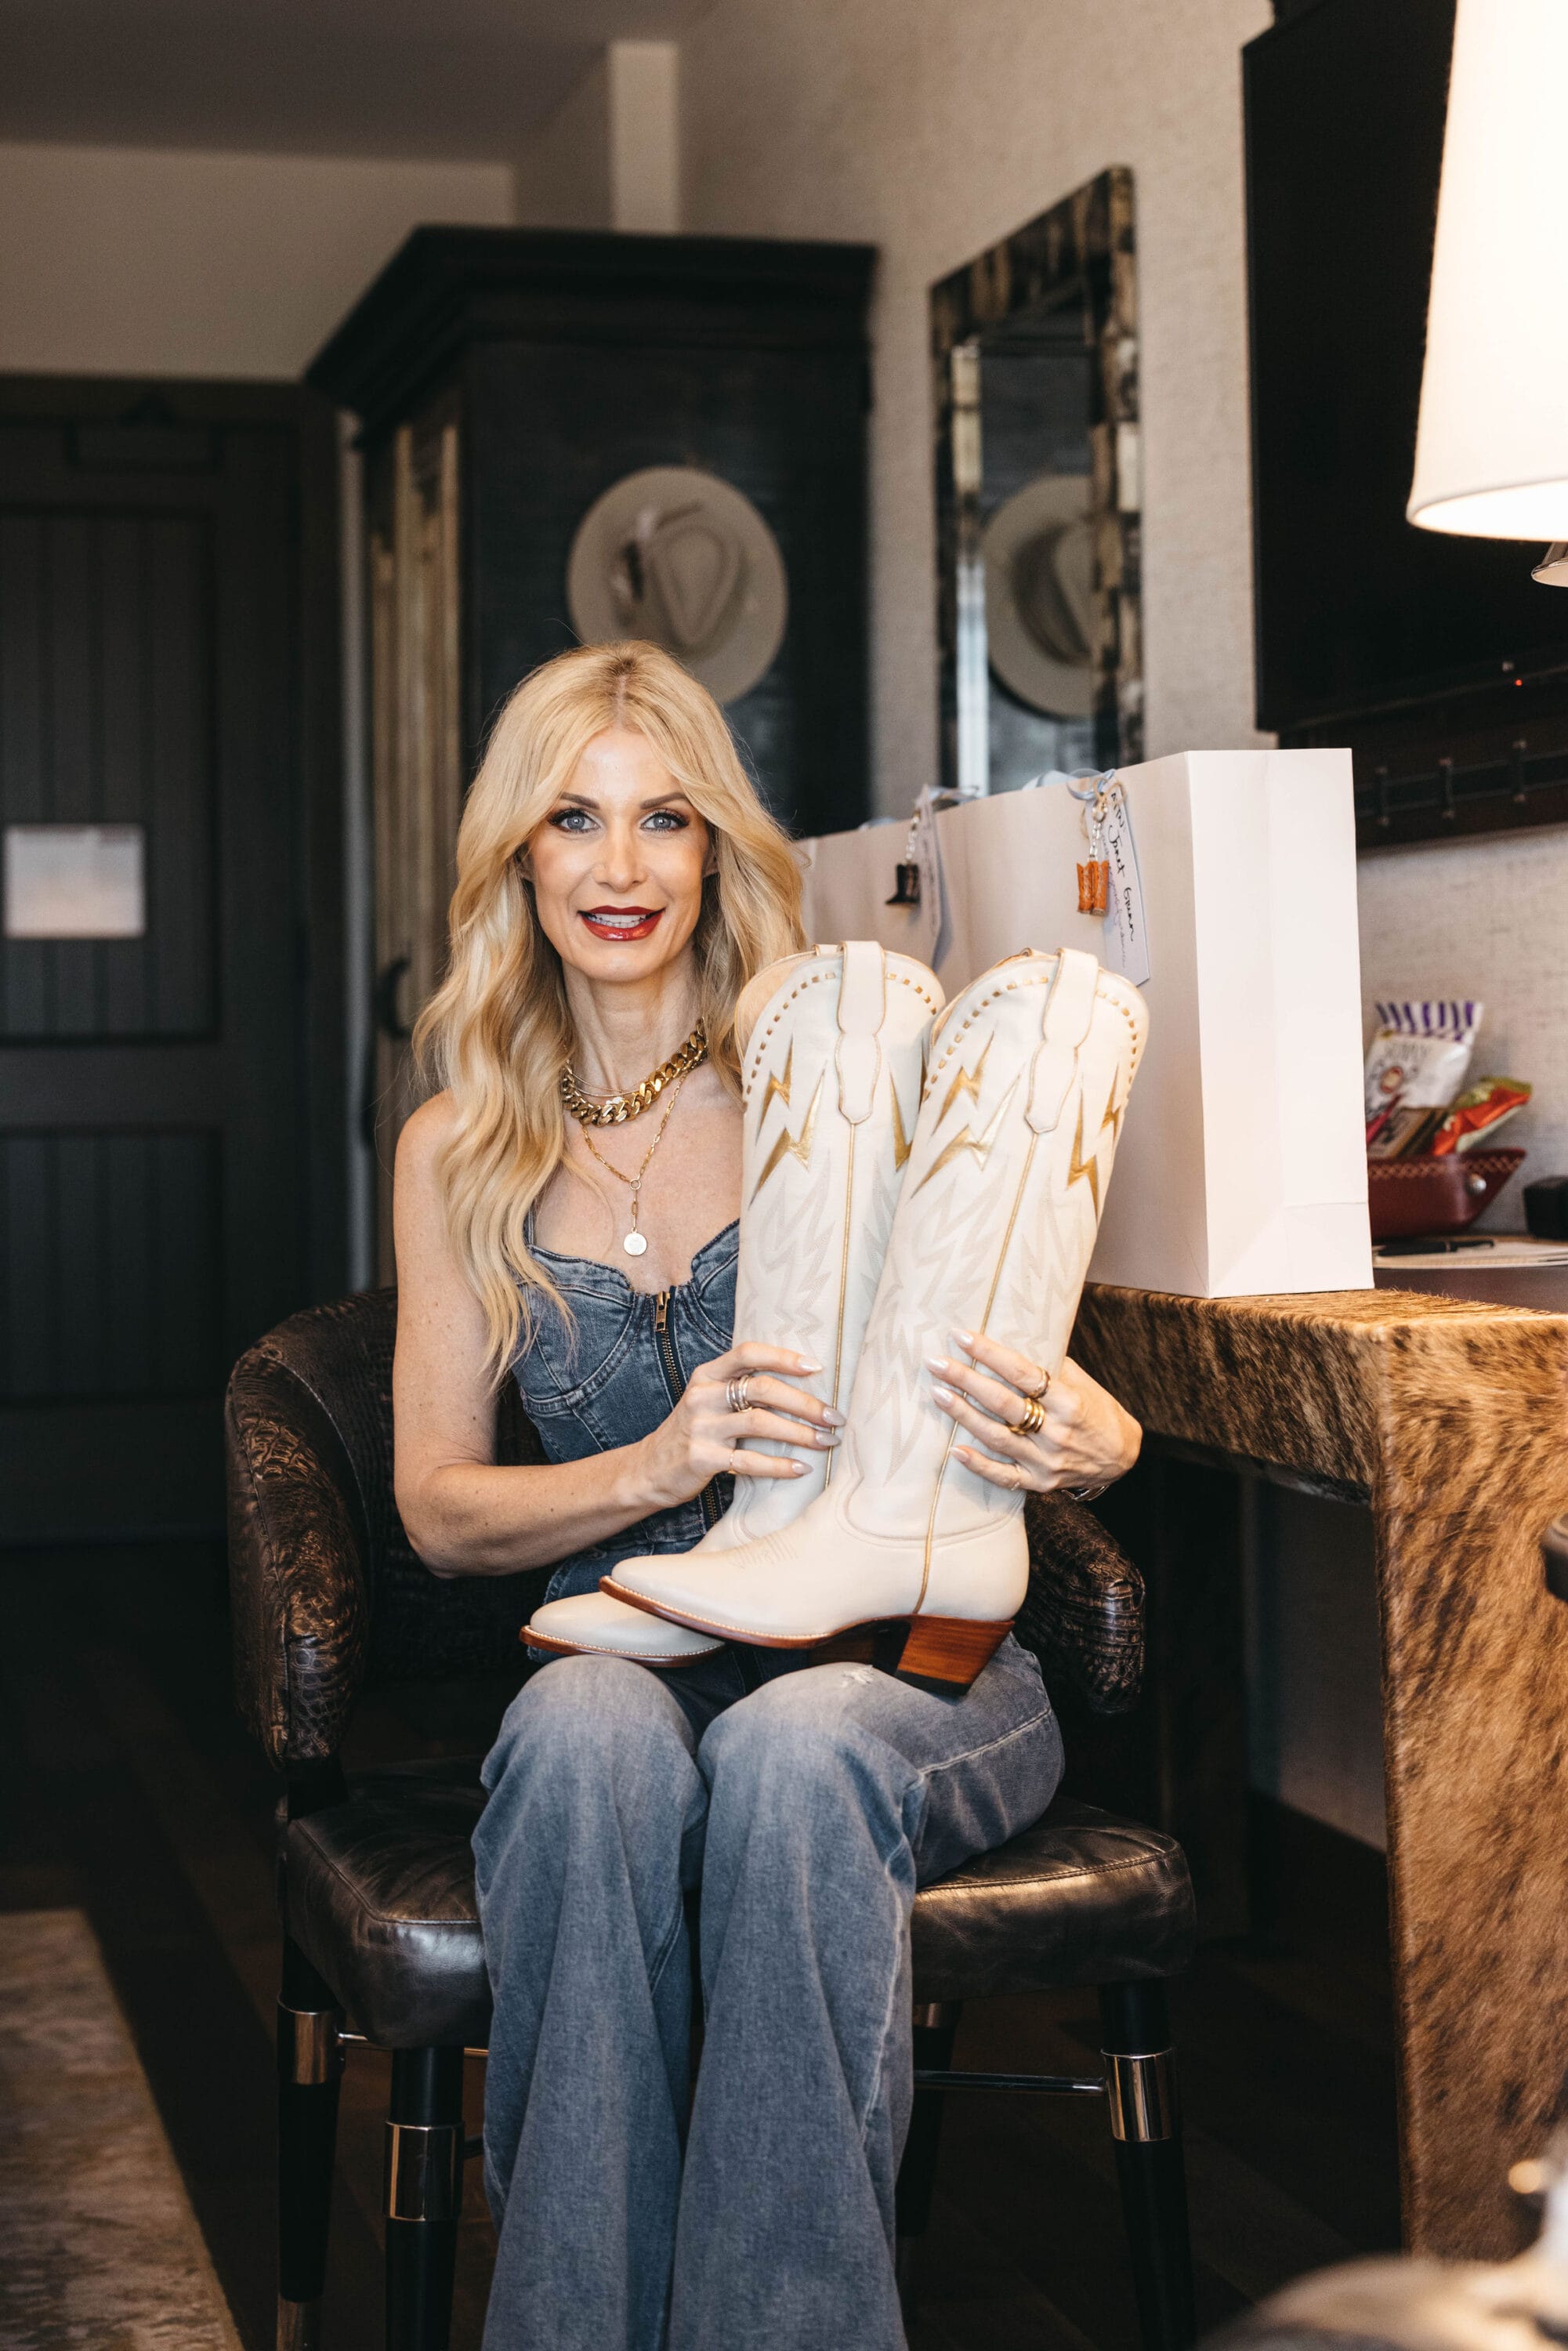 Over 40 Dallas fashion influencer showing ivory cowboy boots from City Boots at Hotel Drover.